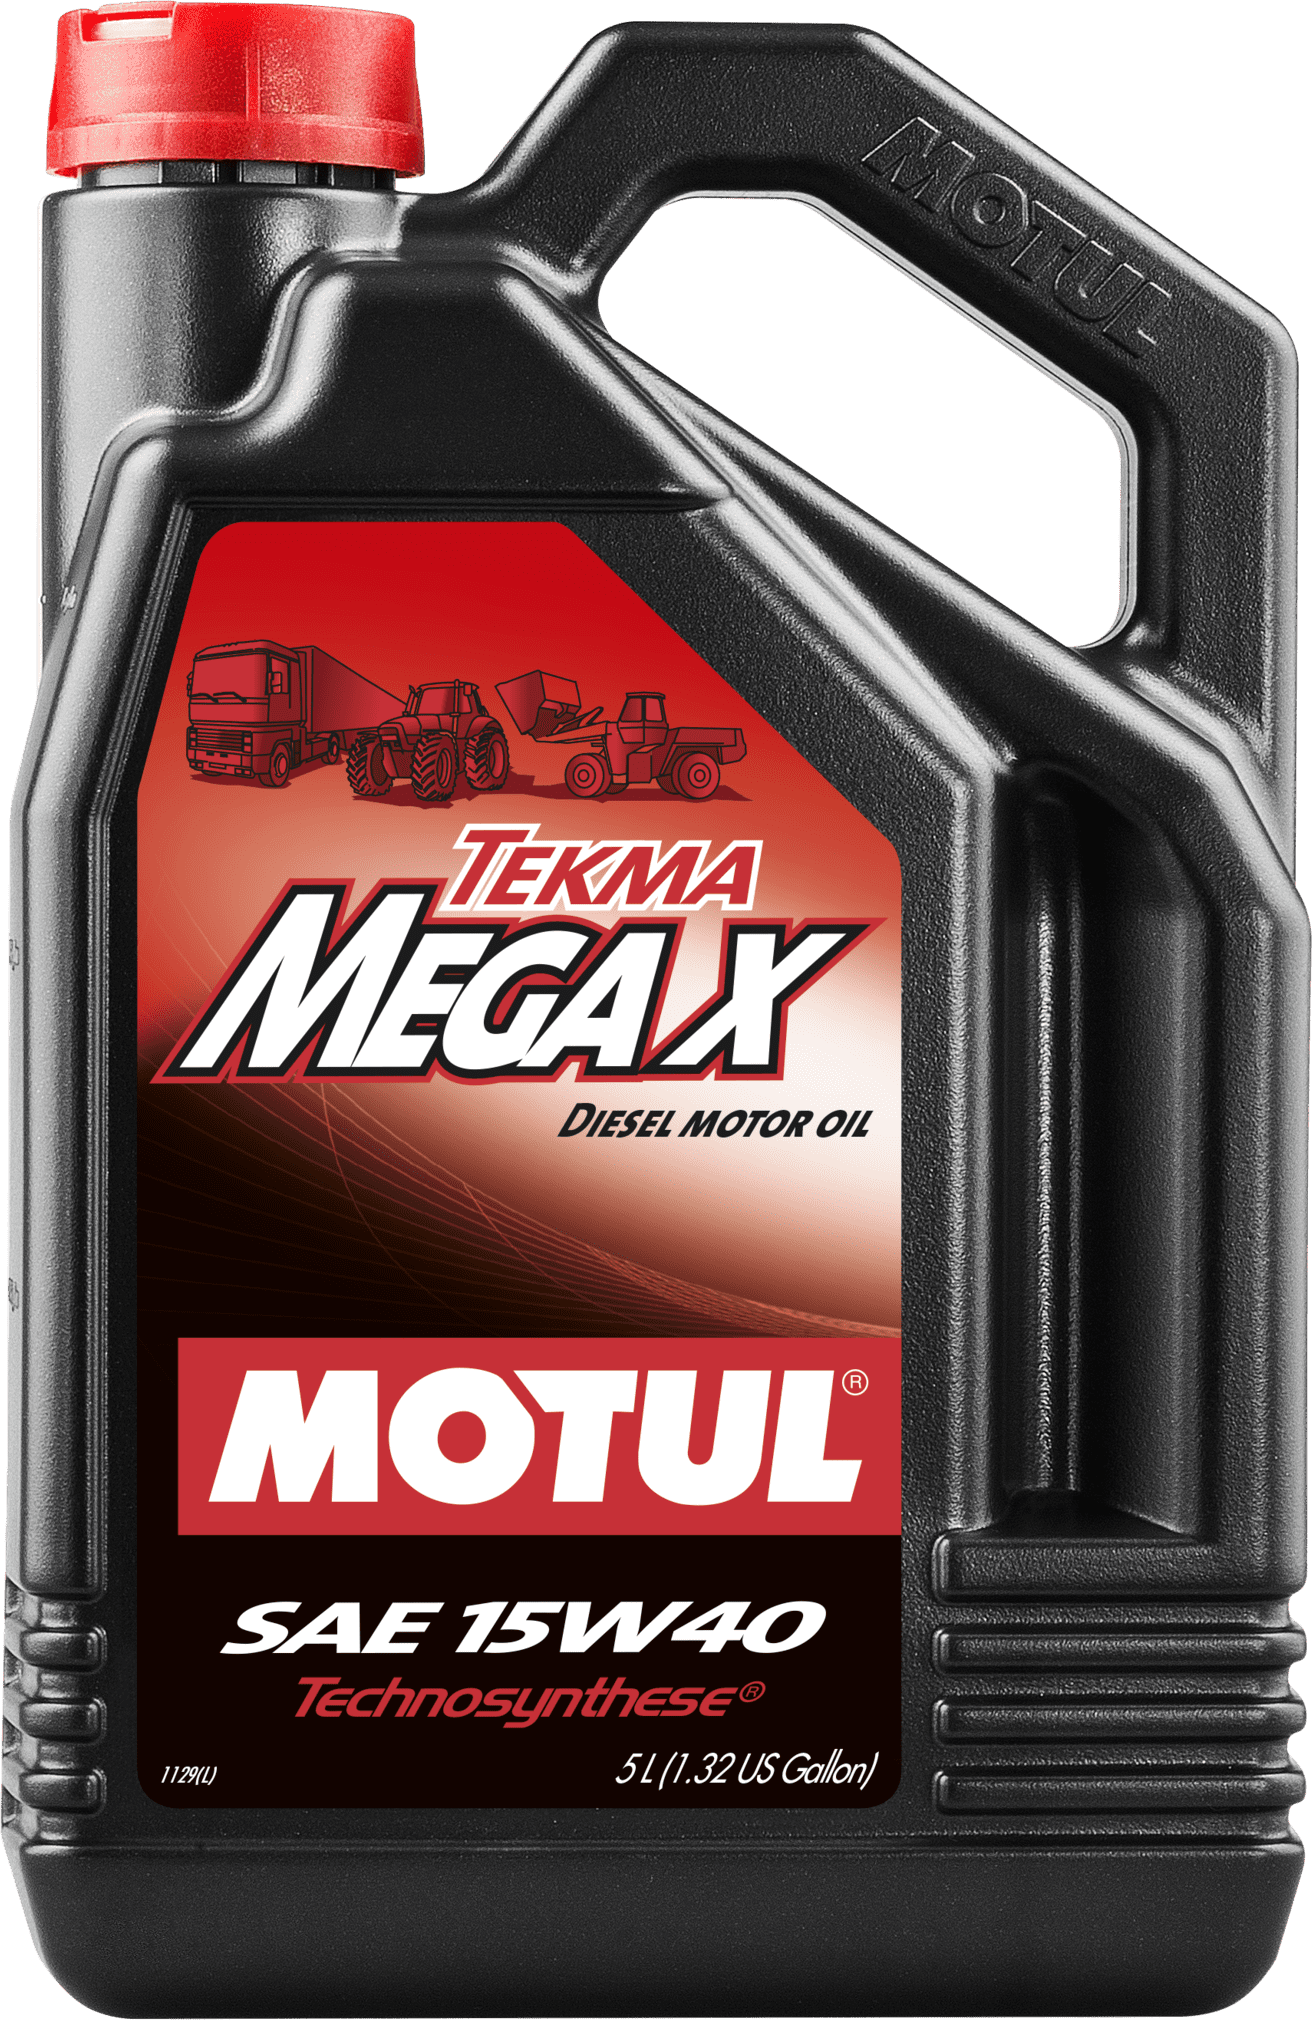 106378-5 Tekma Mega X 15W-40 is a lubricant for heavy duty diesel engines naturally aspirated or turbocharged: trucks, bulldozers, construction machinery, buses, farm machinery, stationary engines, boat engines...